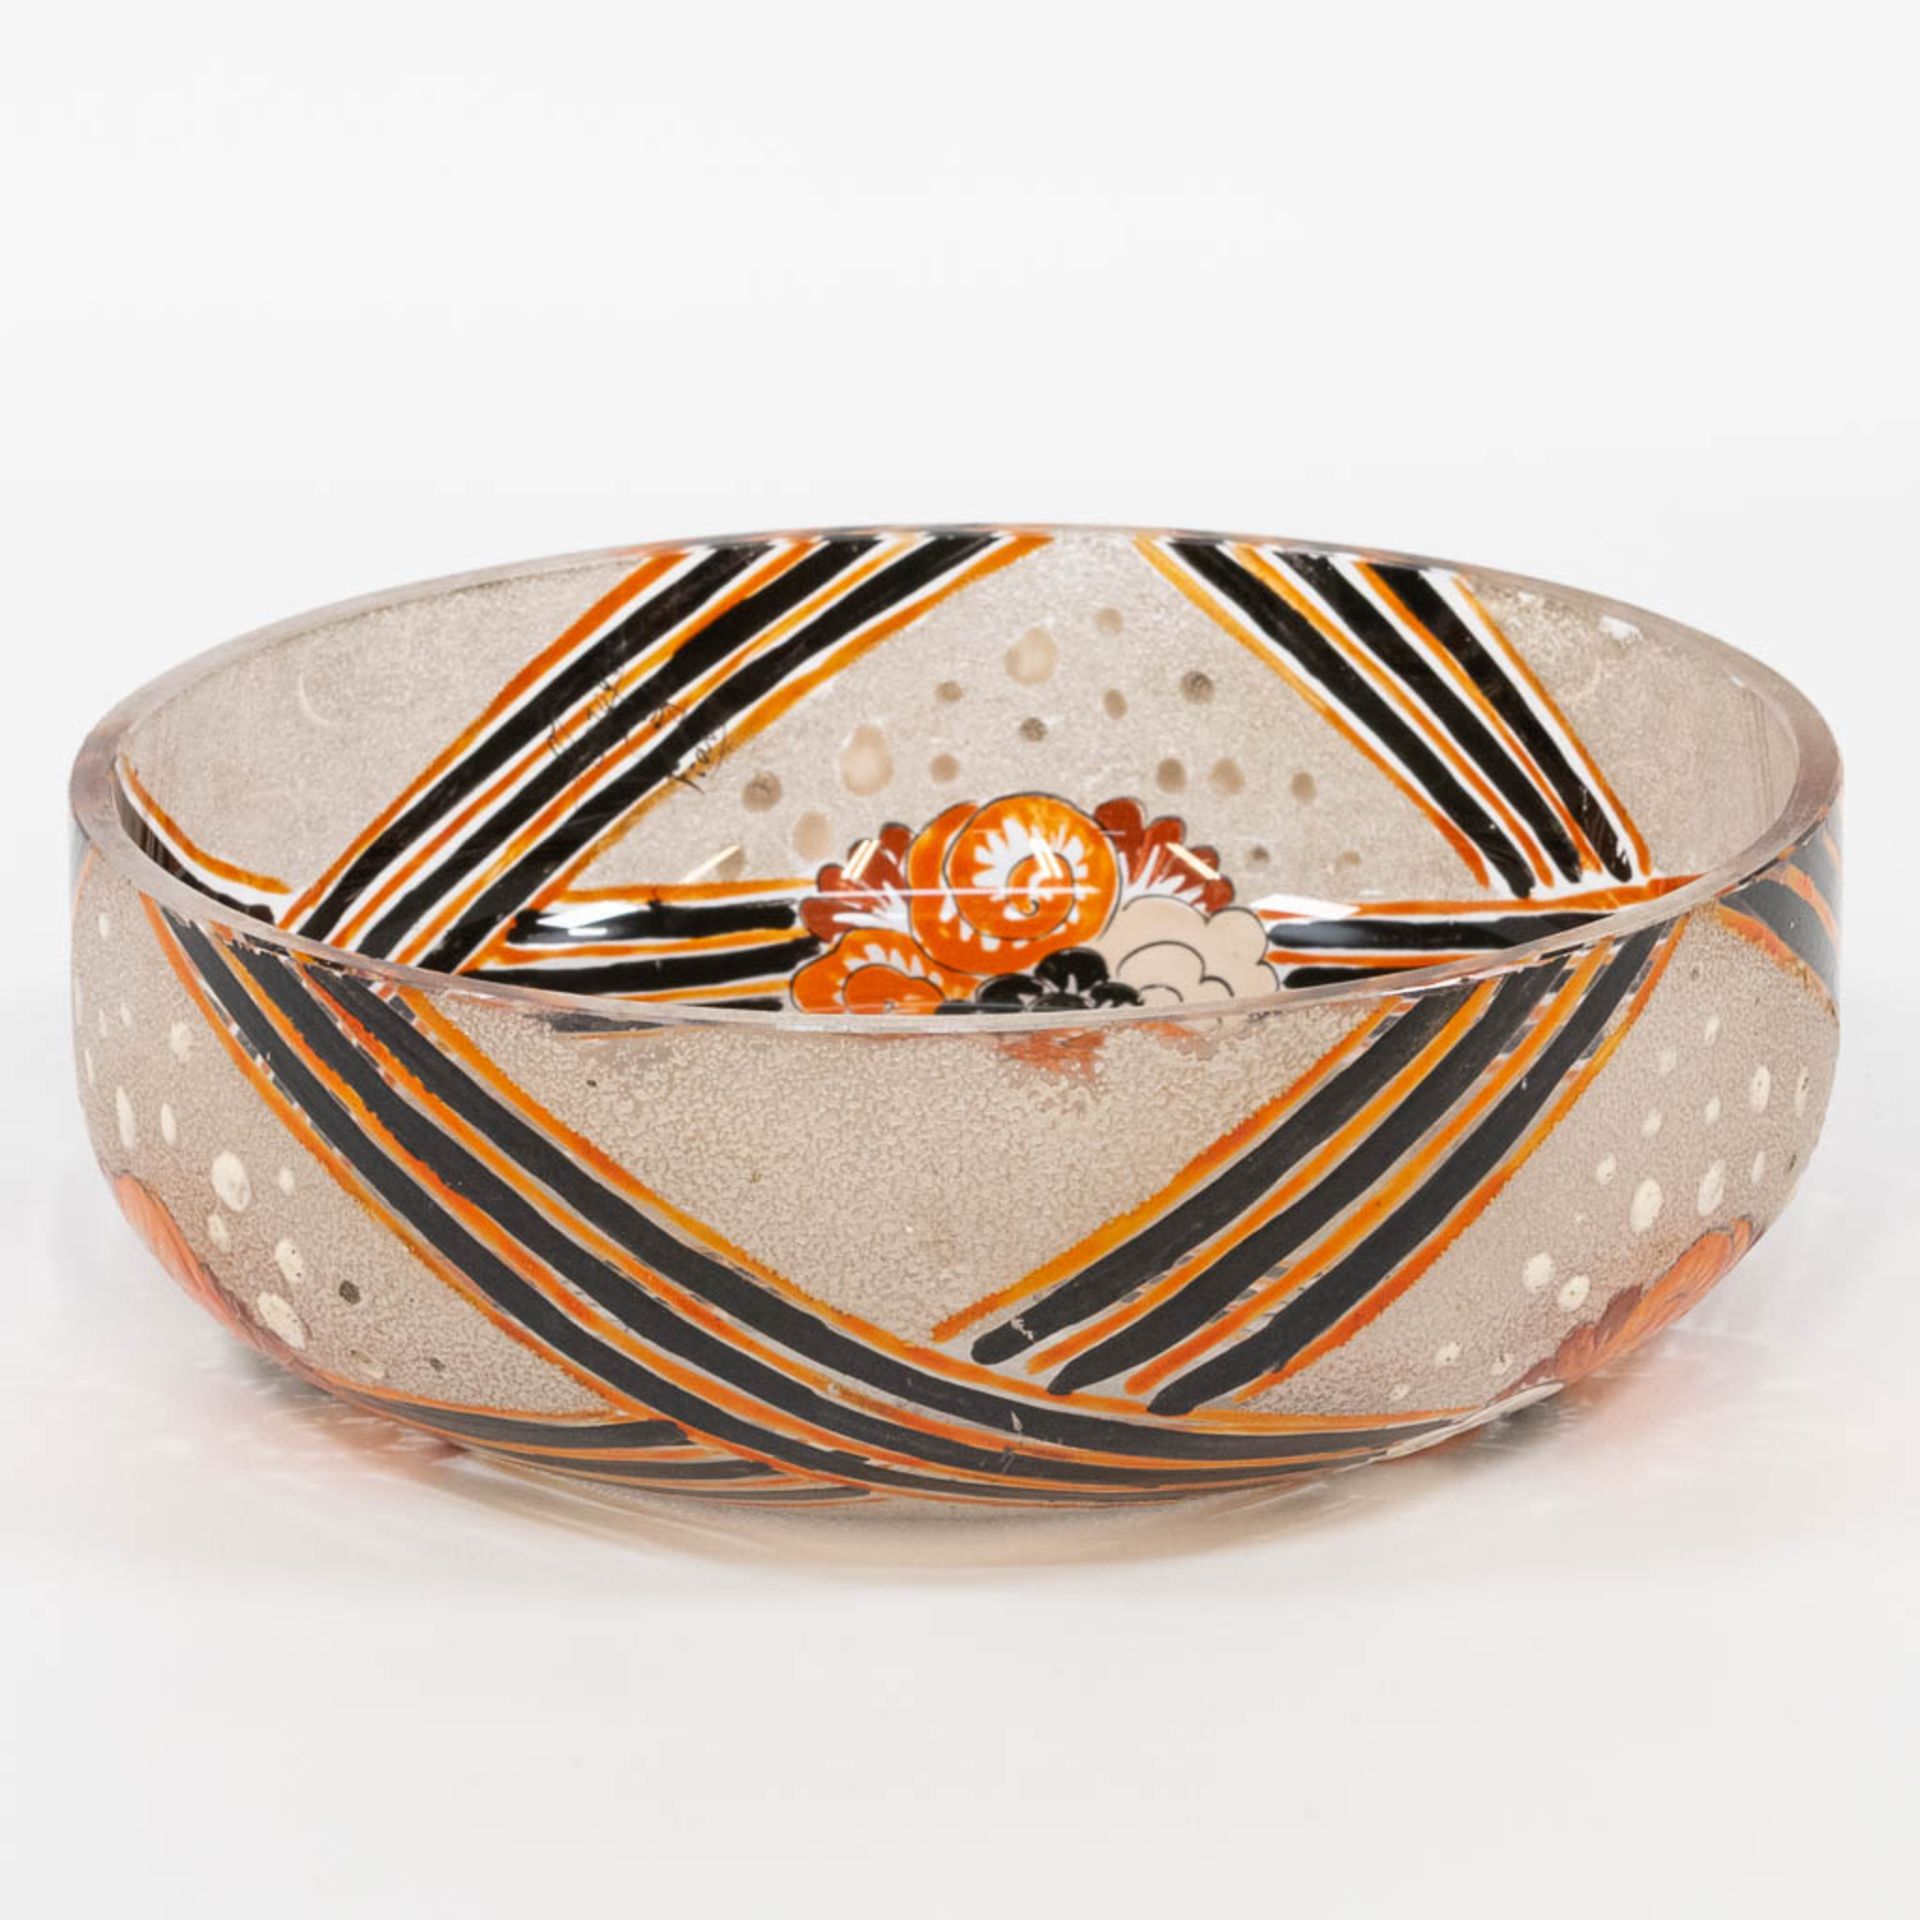 Adrien MAZOYER (1887-1950) A with enamel hand-painted bowl. Marked. (7 x 21 cm) - Image 10 of 13